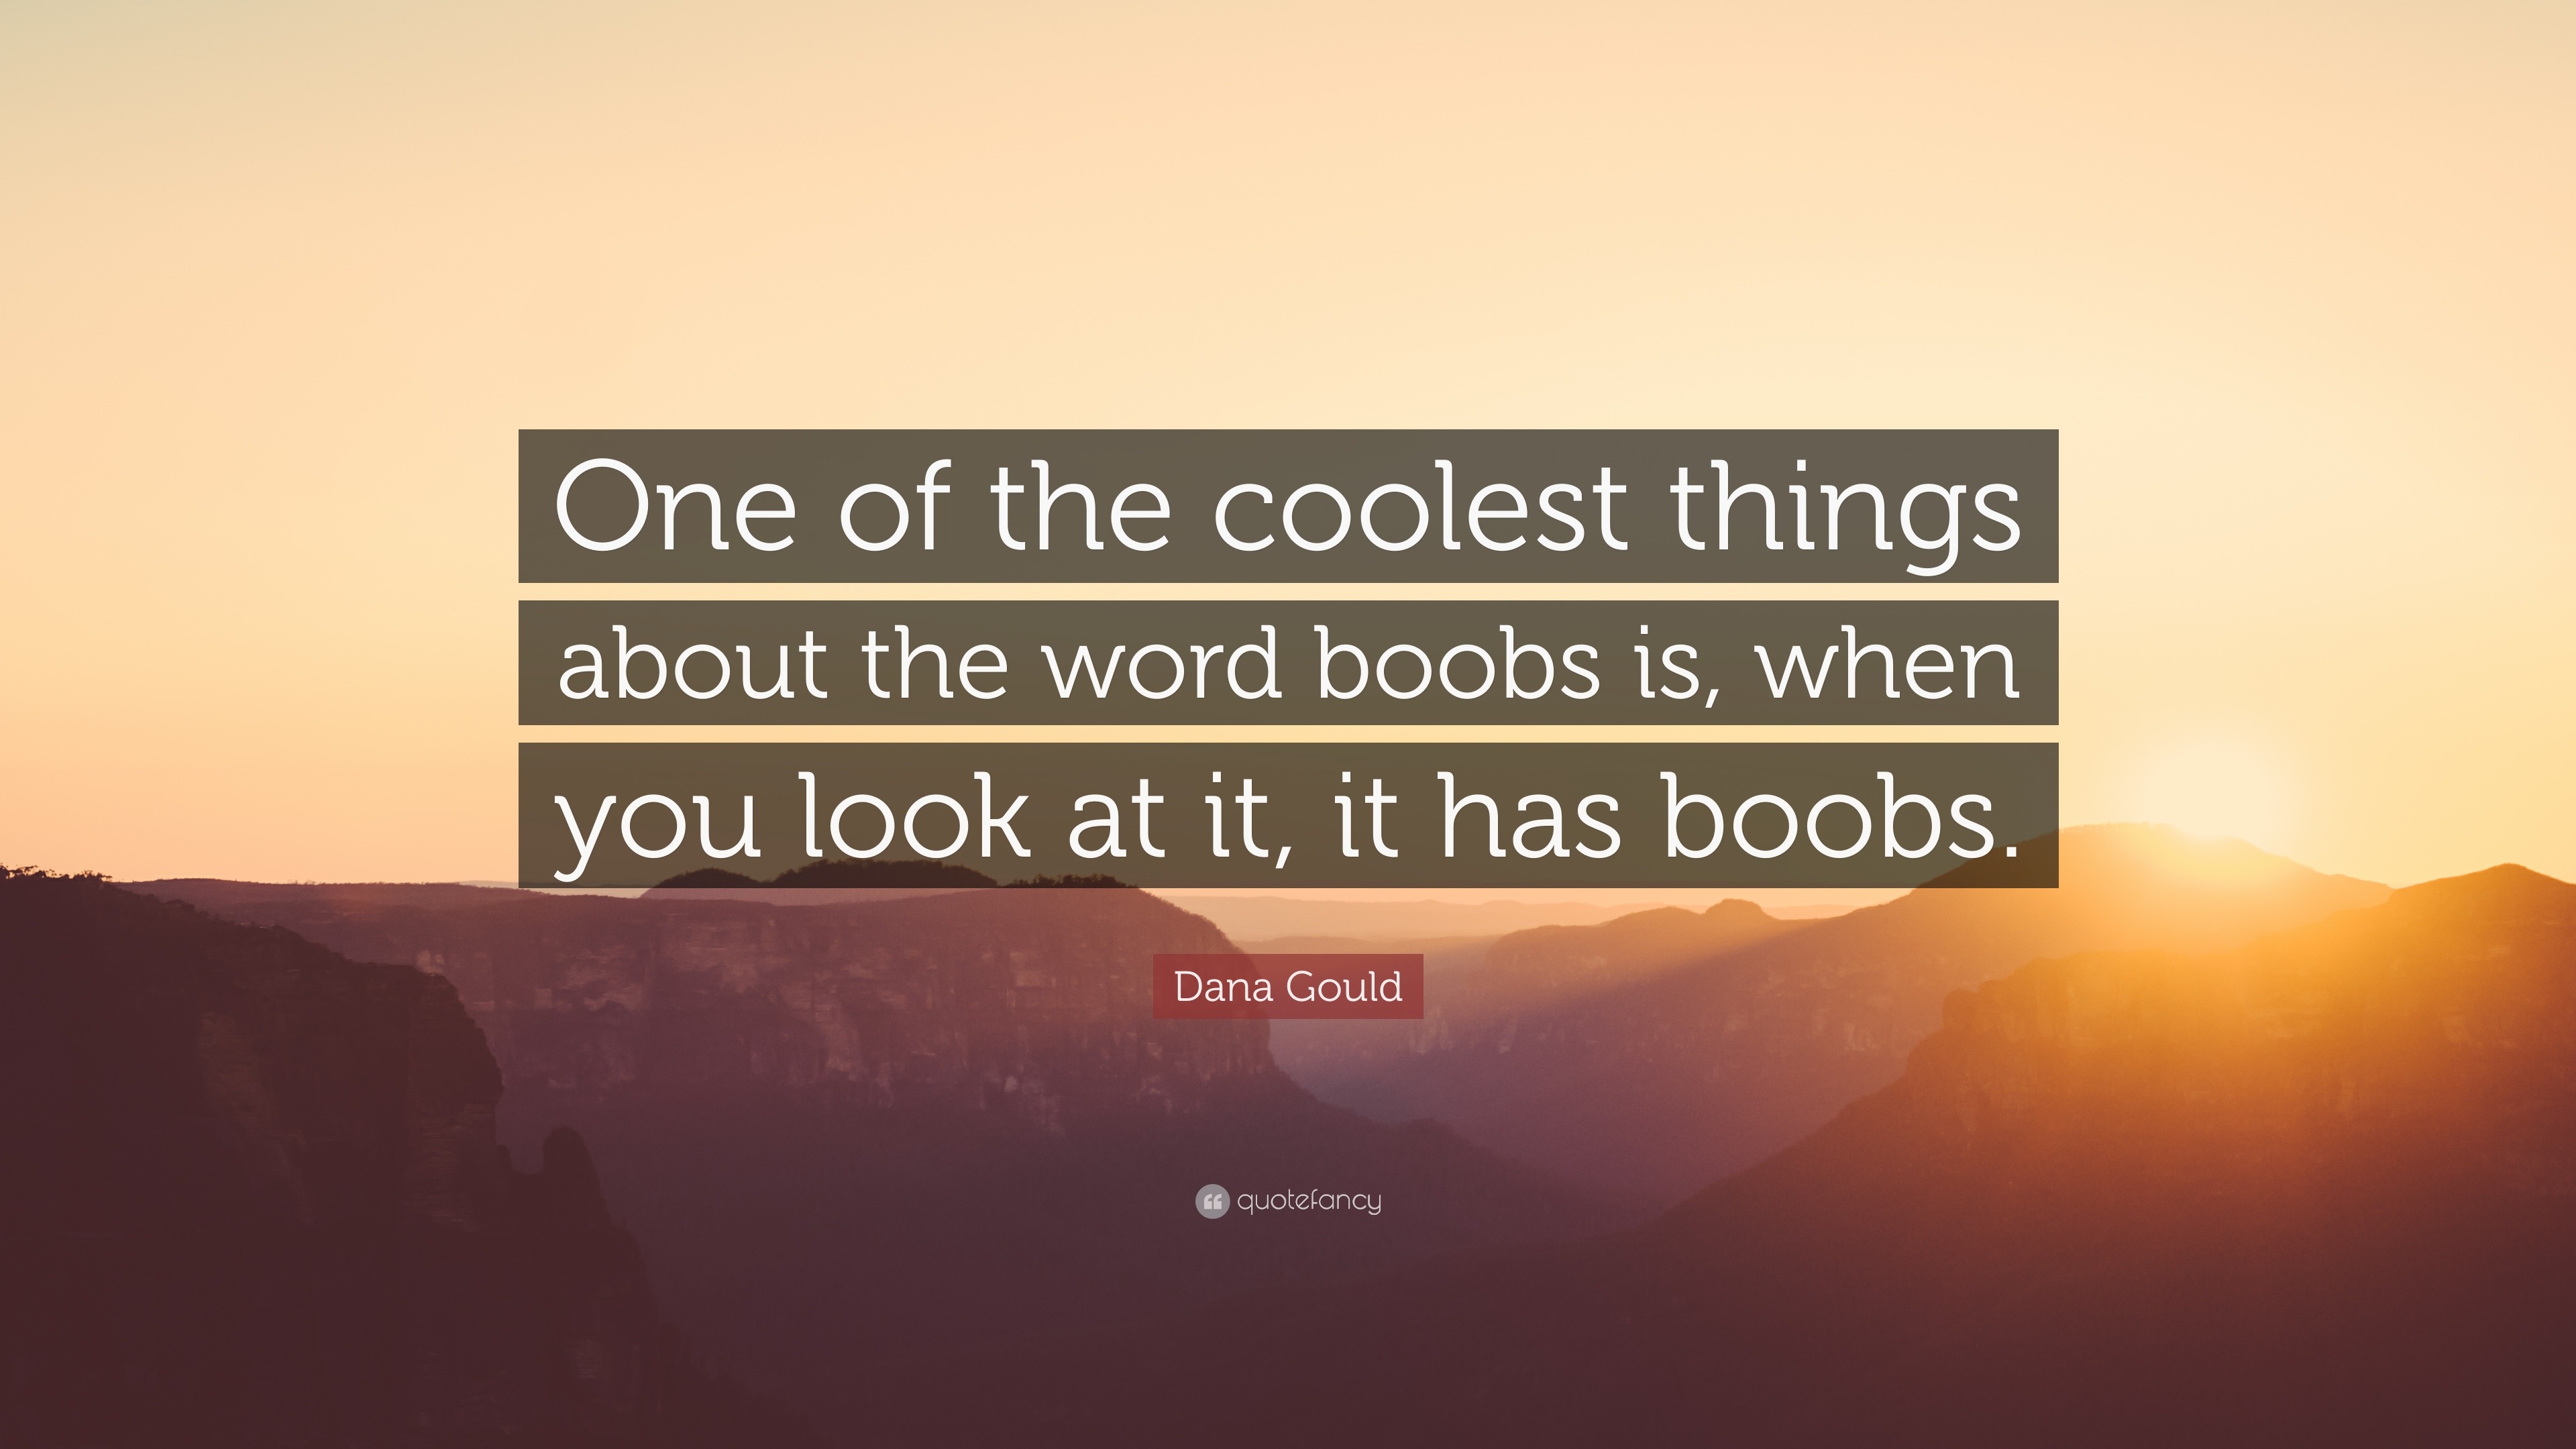 Dana Gould quote: One of the coolest things about the word boobs is